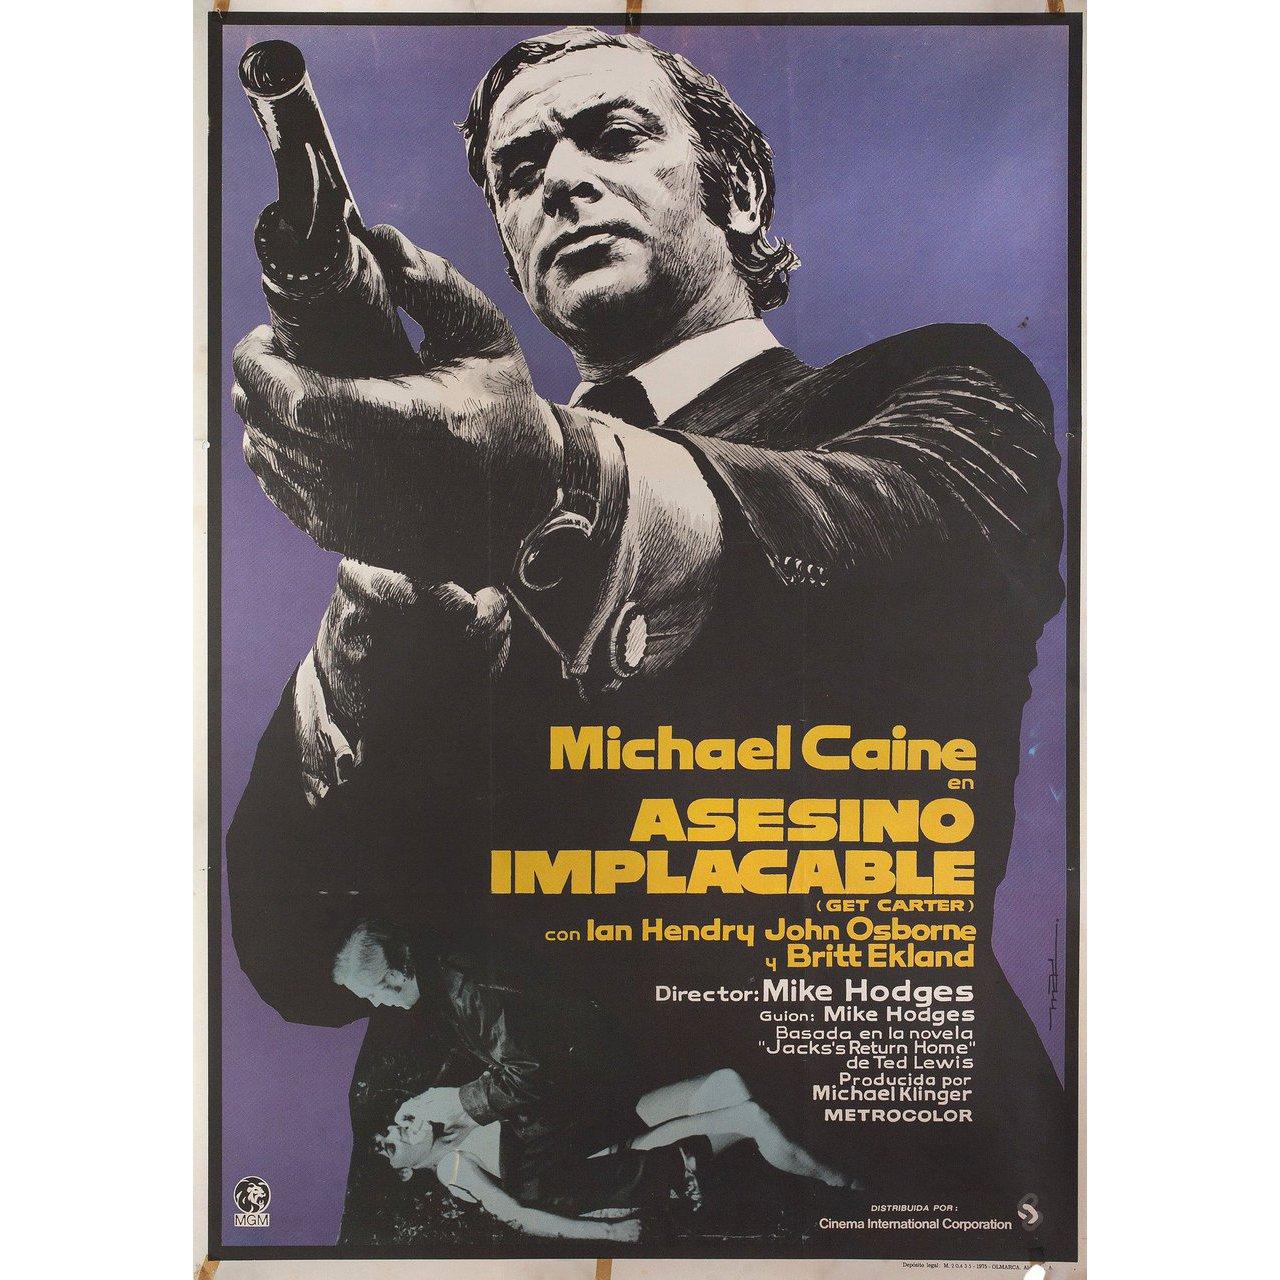 Original 1975 Spanish B1 poster by MAC for the 1971 film Get Carter directed by Mike Hodges with Michael Caine / Ian Hendry / Britt Ekland / John Osborne. Very good-fine condition, folded. Many original posters were issued folded or were